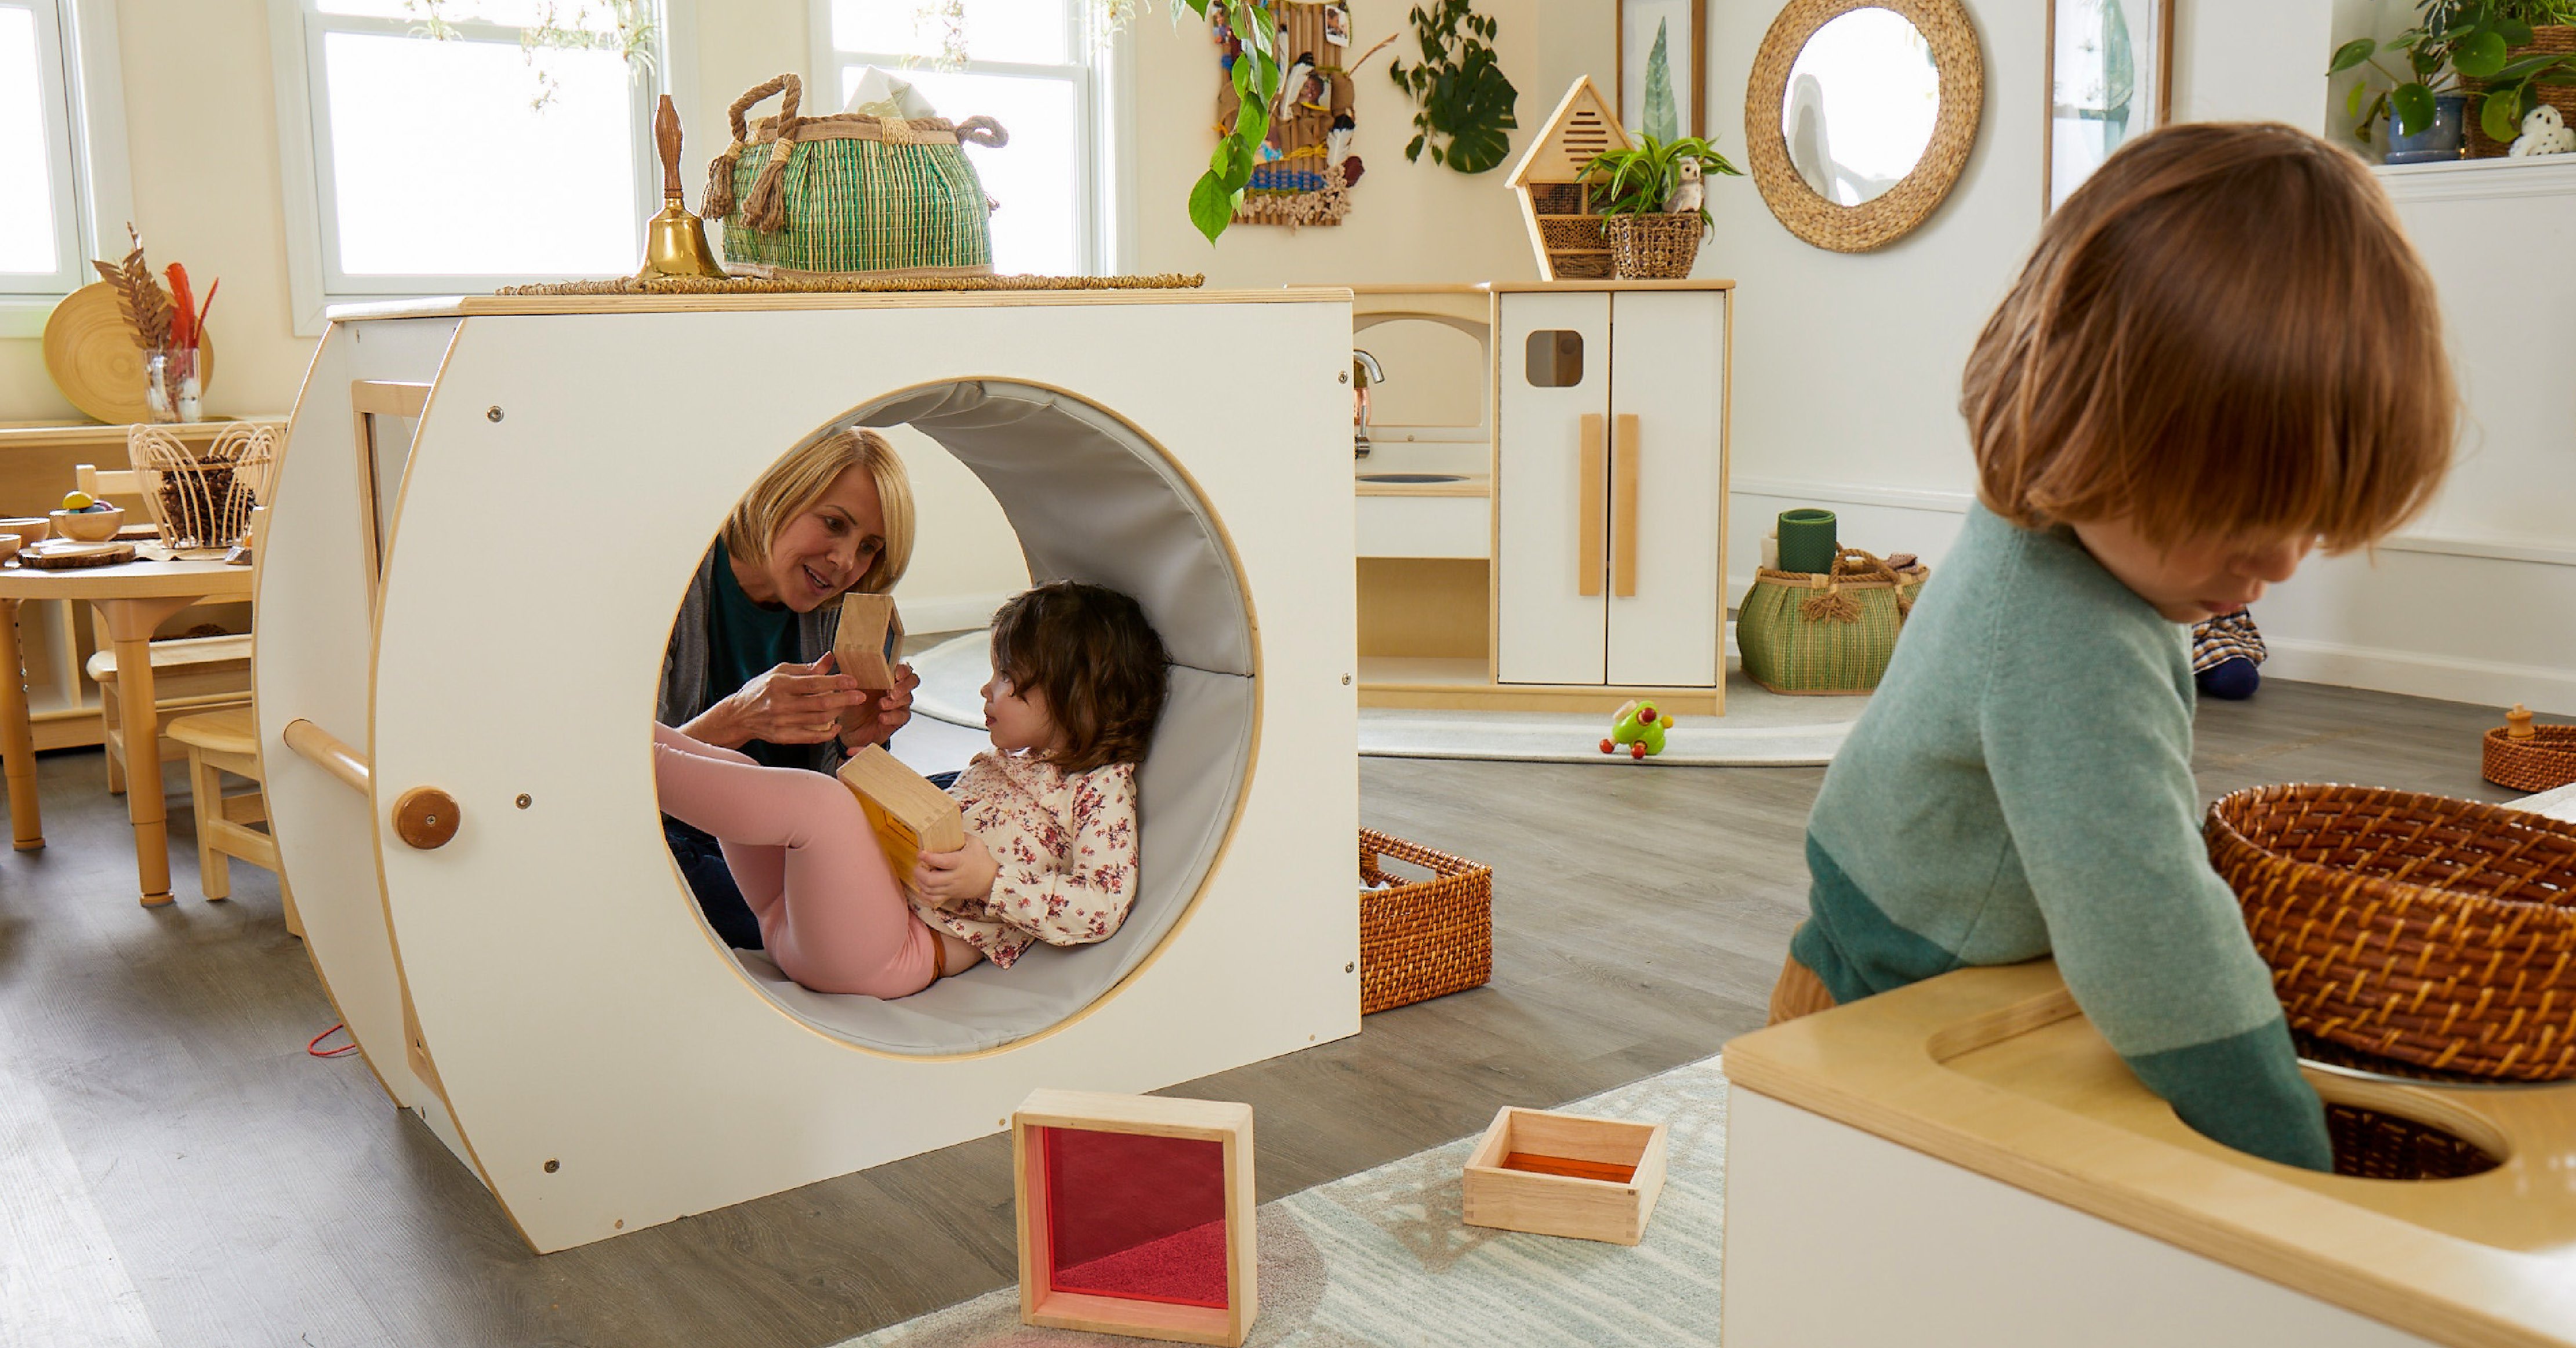 The Sense of Place for Wee Ones Collection Nurtures the Need for Play